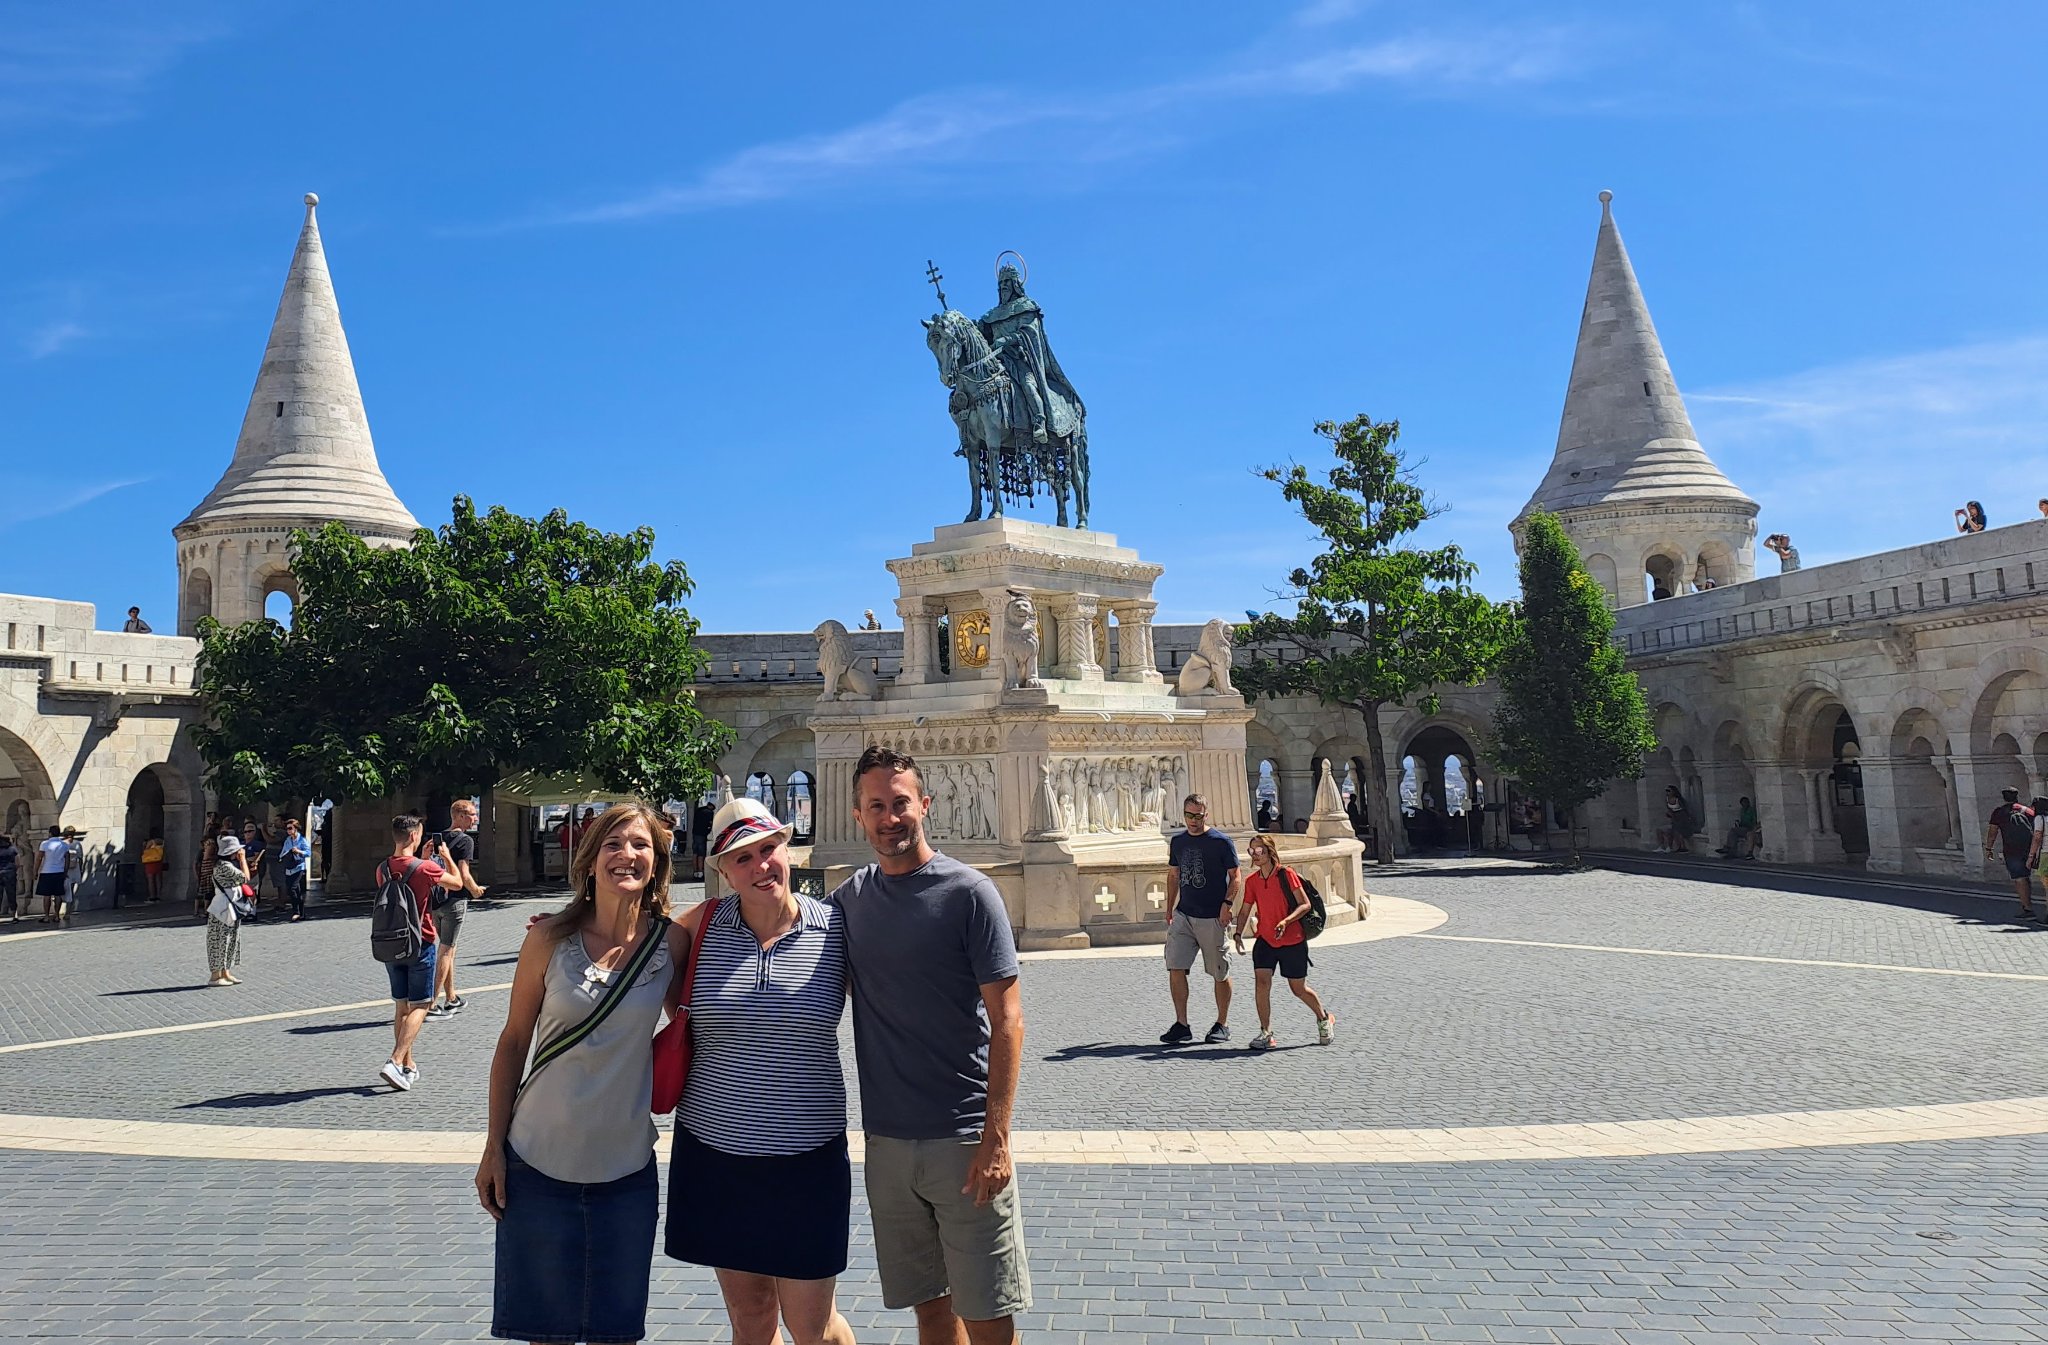 Kelli Buzzard, Budapest Fellow, posing for a group photo in a scenic square in Budapest Hungary.